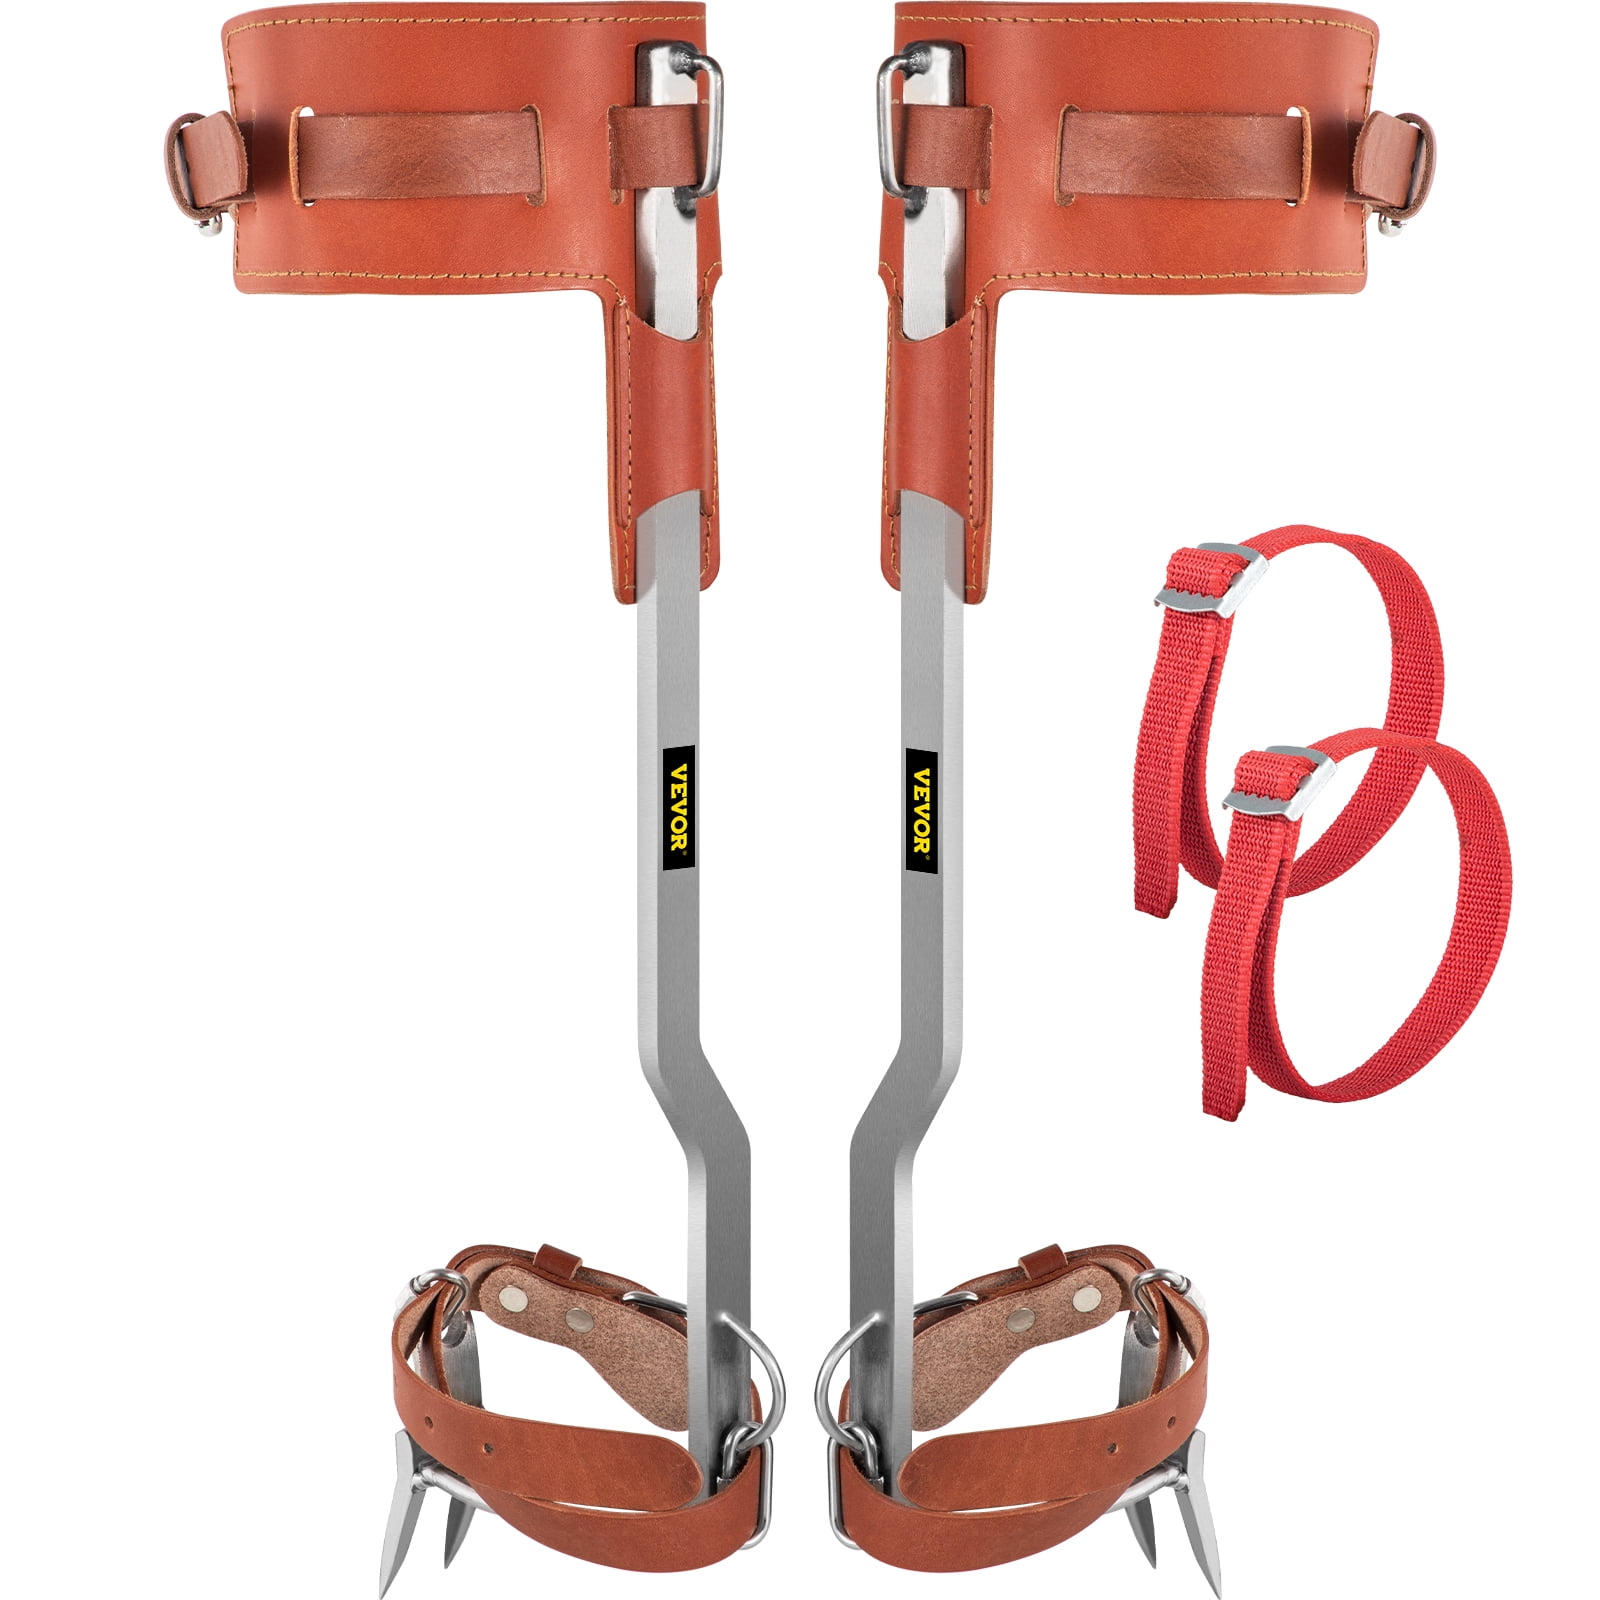 NEW Summit Treestands Bungee Tether and Backpack Strap FREE SHIPPING 